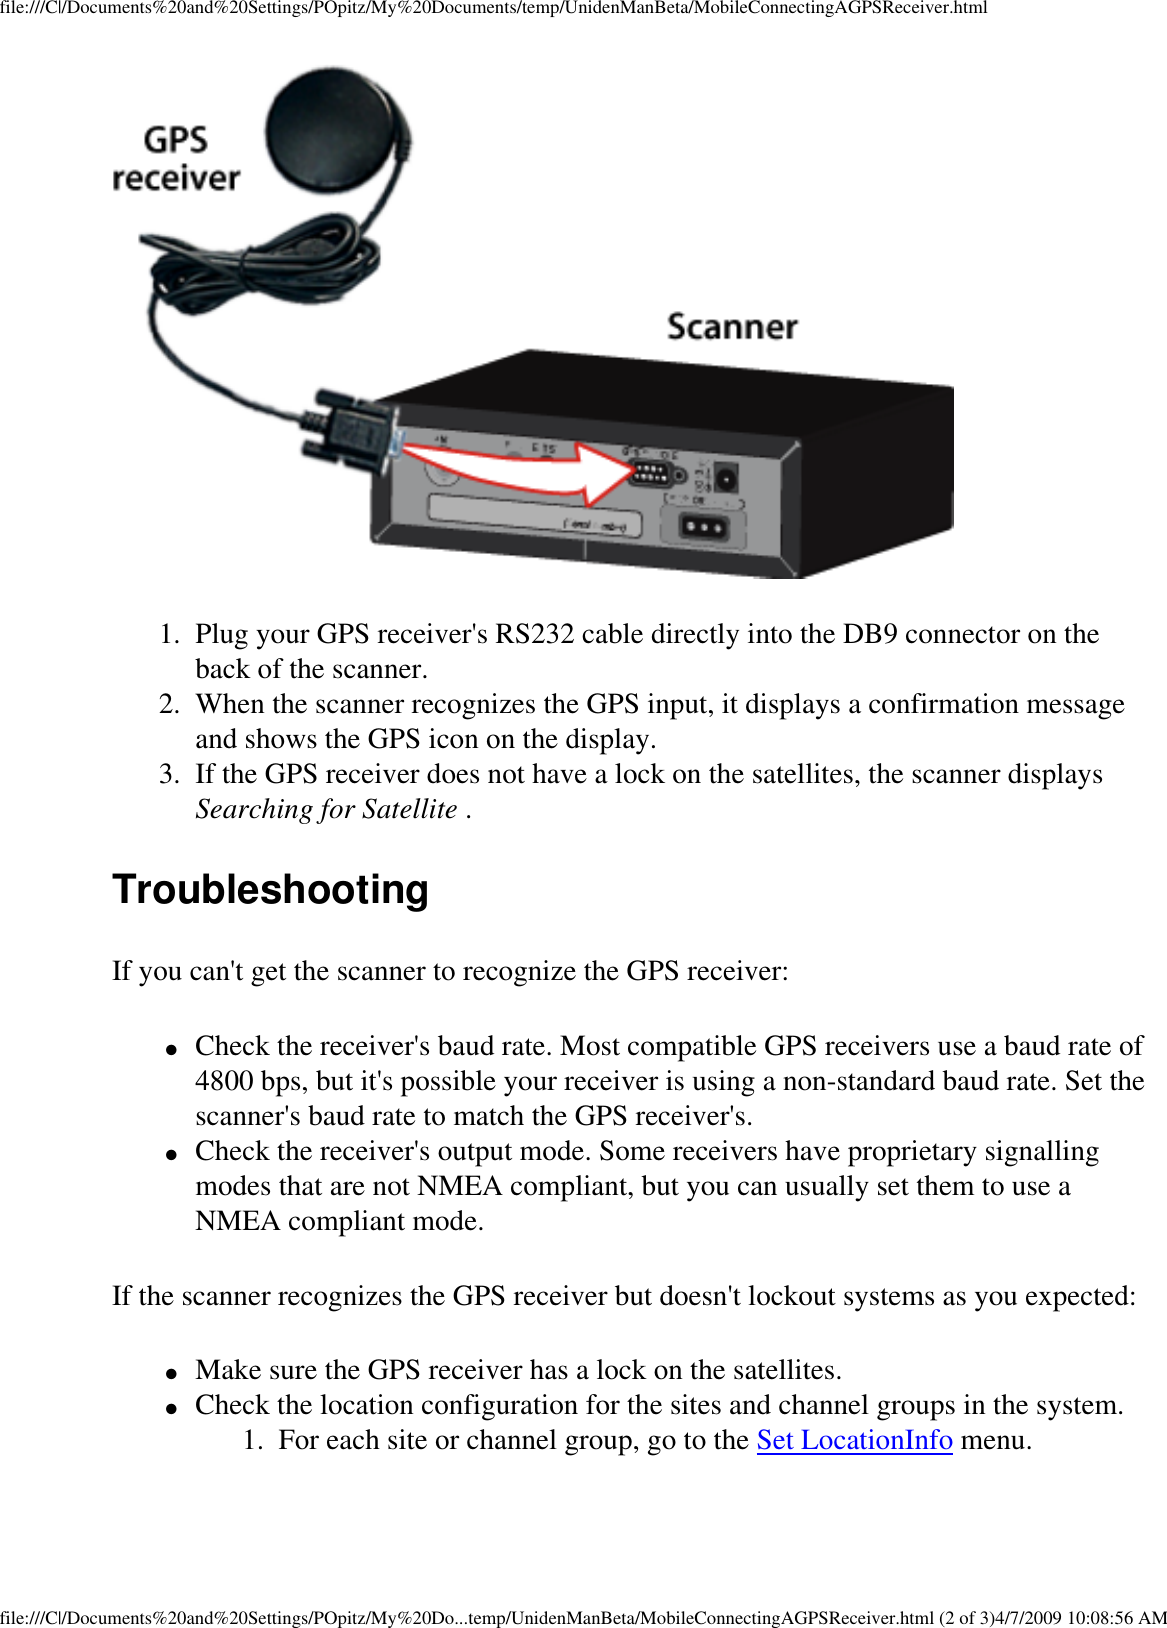 file:///C|/Documents%20and%20Settings/POpitz/My%20Documents/temp/UnidenManBeta/MobileConnectingAGPSReceiver.html 1.  Plug your GPS receiver&apos;s RS232 cable directly into the DB9 connector on the back of the scanner. 2.  When the scanner recognizes the GPS input, it displays a confirmation message and shows the GPS icon on the display. 3.  If the GPS receiver does not have a lock on the satellites, the scanner displays Searching for Satellite . Troubleshooting If you can&apos;t get the scanner to recognize the GPS receiver: ●     Check the receiver&apos;s baud rate. Most compatible GPS receivers use a baud rate of 4800 bps, but it&apos;s possible your receiver is using a non-standard baud rate. Set the scanner&apos;s baud rate to match the GPS receiver&apos;s. ●     Check the receiver&apos;s output mode. Some receivers have proprietary signalling modes that are not NMEA compliant, but you can usually set them to use a NMEA compliant mode. If the scanner recognizes the GPS receiver but doesn&apos;t lockout systems as you expected: ●     Make sure the GPS receiver has a lock on the satellites. ●     Check the location configuration for the sites and channel groups in the system. 1.  For each site or channel group, go to the Set LocationInfo menu. file:///C|/Documents%20and%20Settings/POpitz/My%20Do...temp/UnidenManBeta/MobileConnectingAGPSReceiver.html (2 of 3)4/7/2009 10:08:56 AM